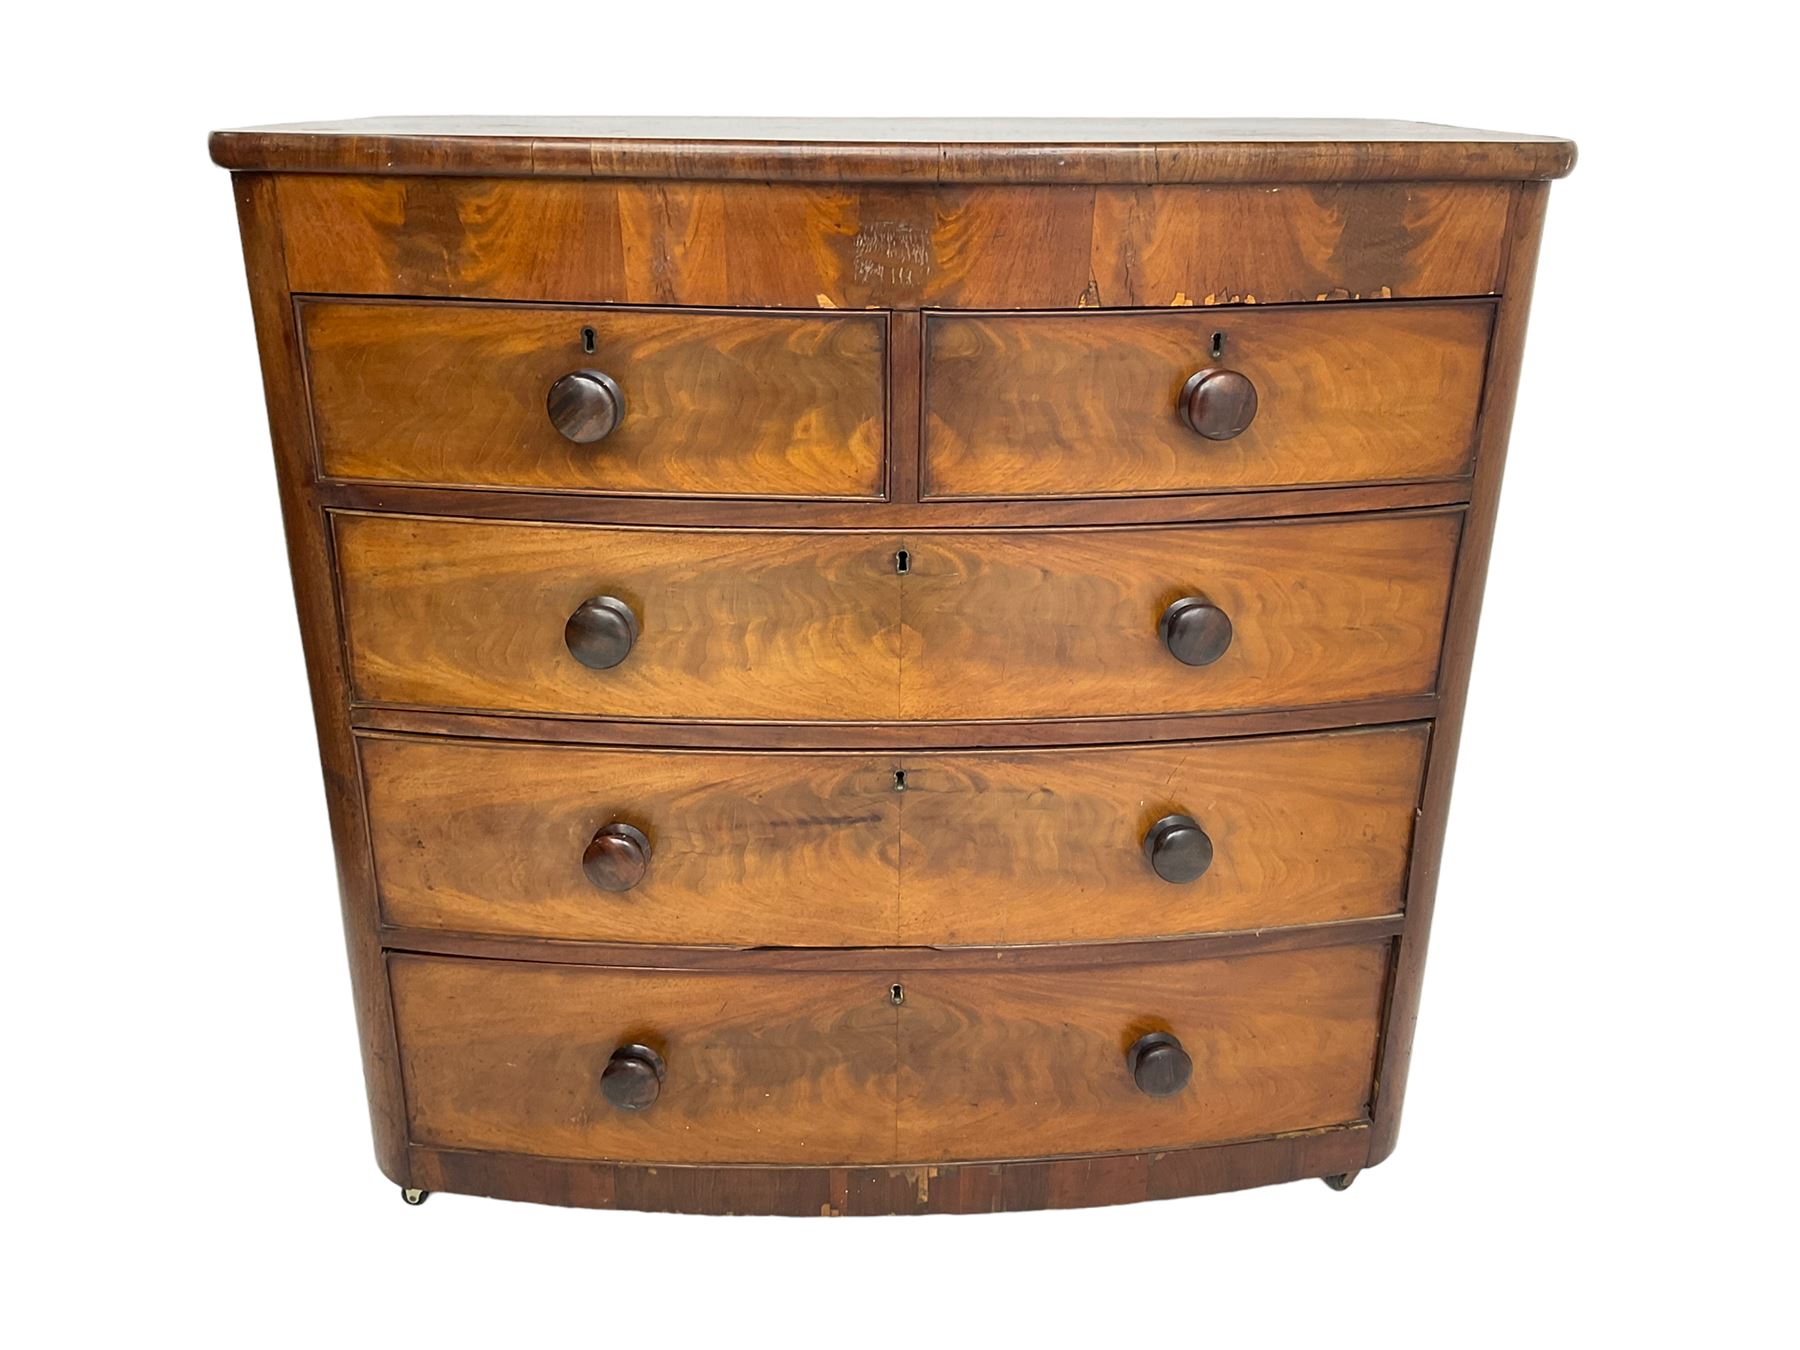 Late 19th century mahogany bow front chest